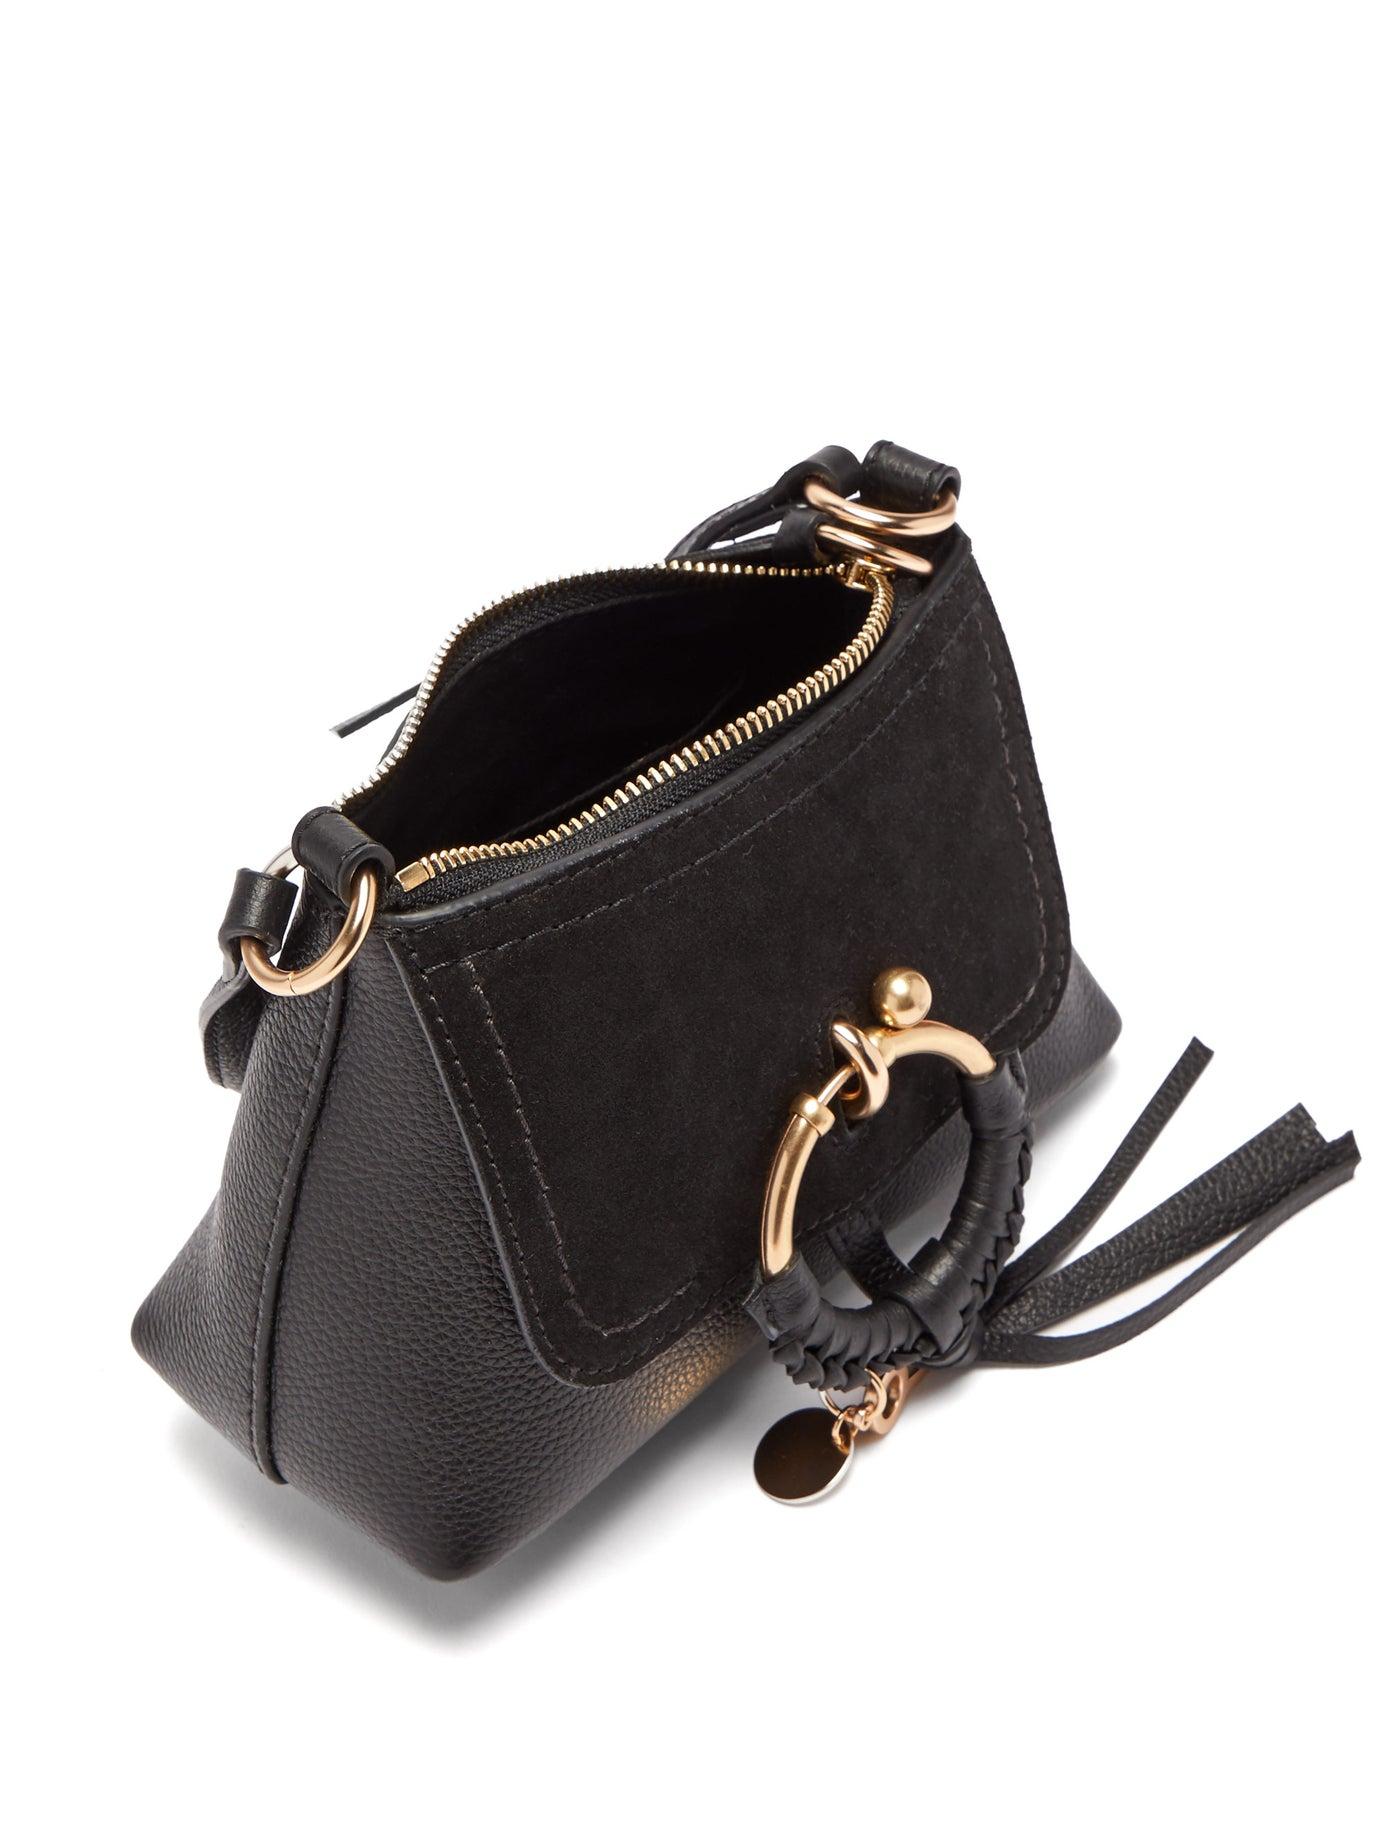 See By Chloé Joan Mini Leather And Suede Cross Body Bag in Black - Lyst